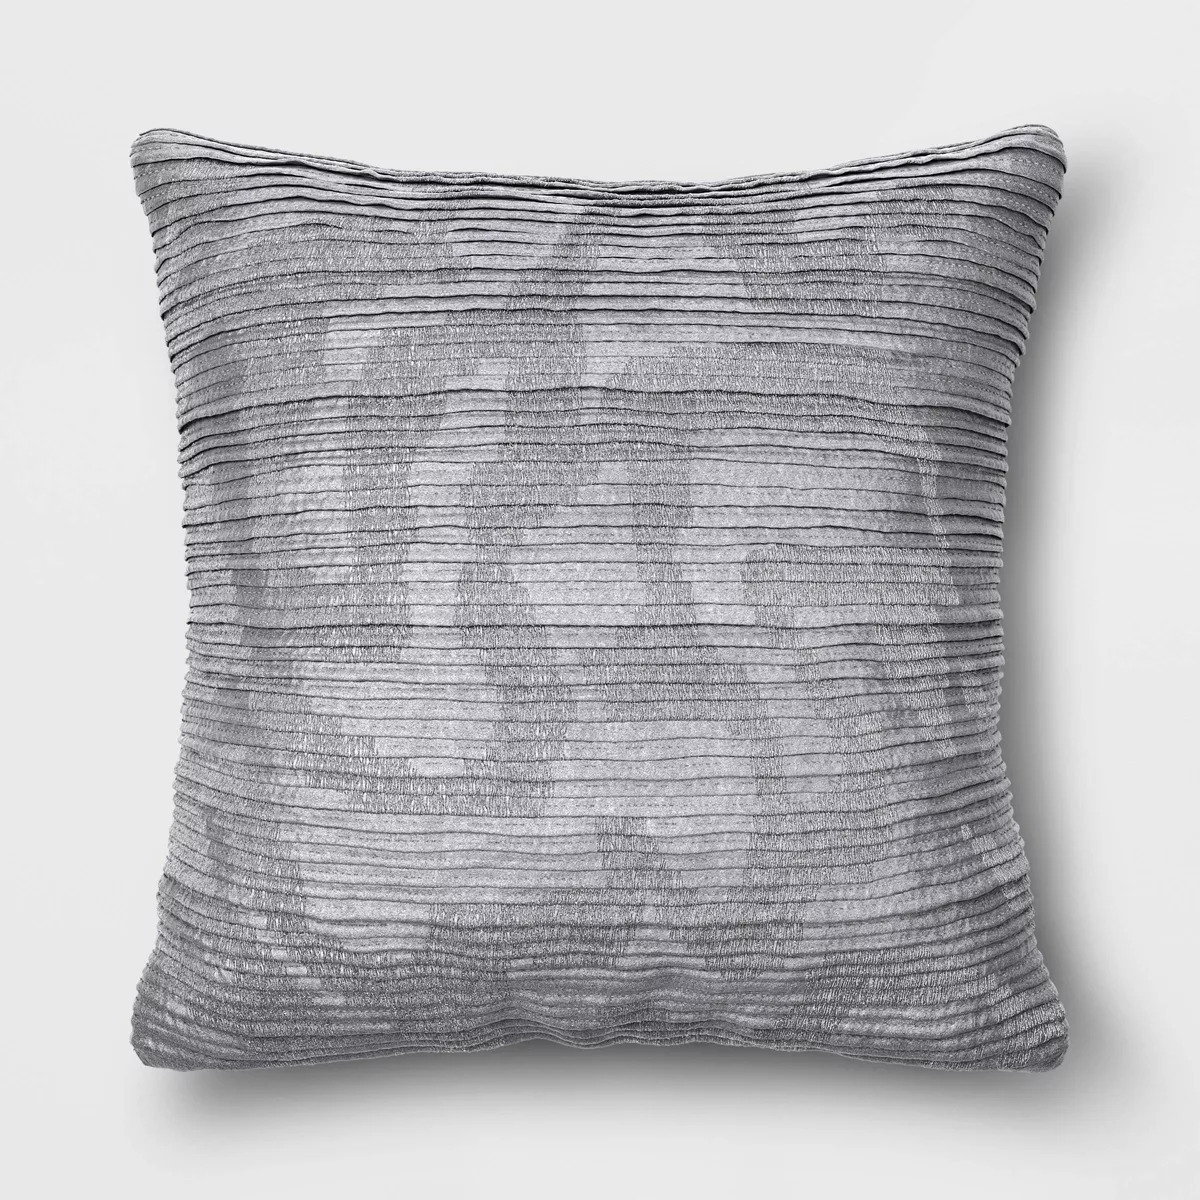 Target: 40% Off Select Threshold Throw Pillows & Blankets: 18" Geometric Square Throw Pillow $12 & More + Free Store Pickup